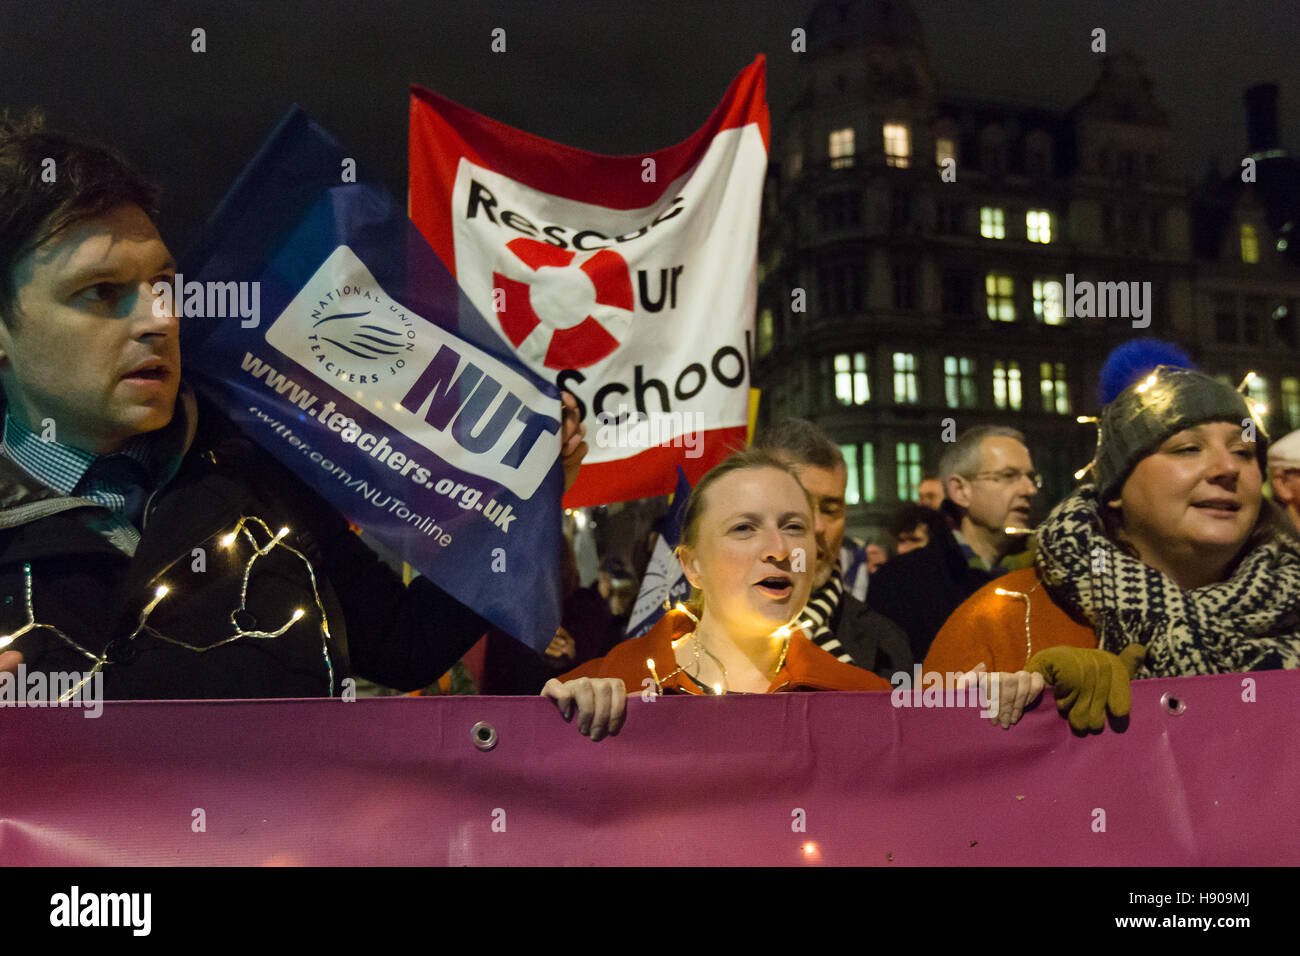 London, UK. 17th Nov 2016. Protesters march down Whitehall. Teachers from the National Union of Teachers (NUT), school governors and support staff stage a protest rally against government cuts in education funding outside Downing Street in Westminster before marching to the Department for Education this evening. Protesters are demanding and increase in education funding in the upcoming budget to ensure that every child gets the best education. Credit:  Vickie Flores/Alamy Live News Stock Photo